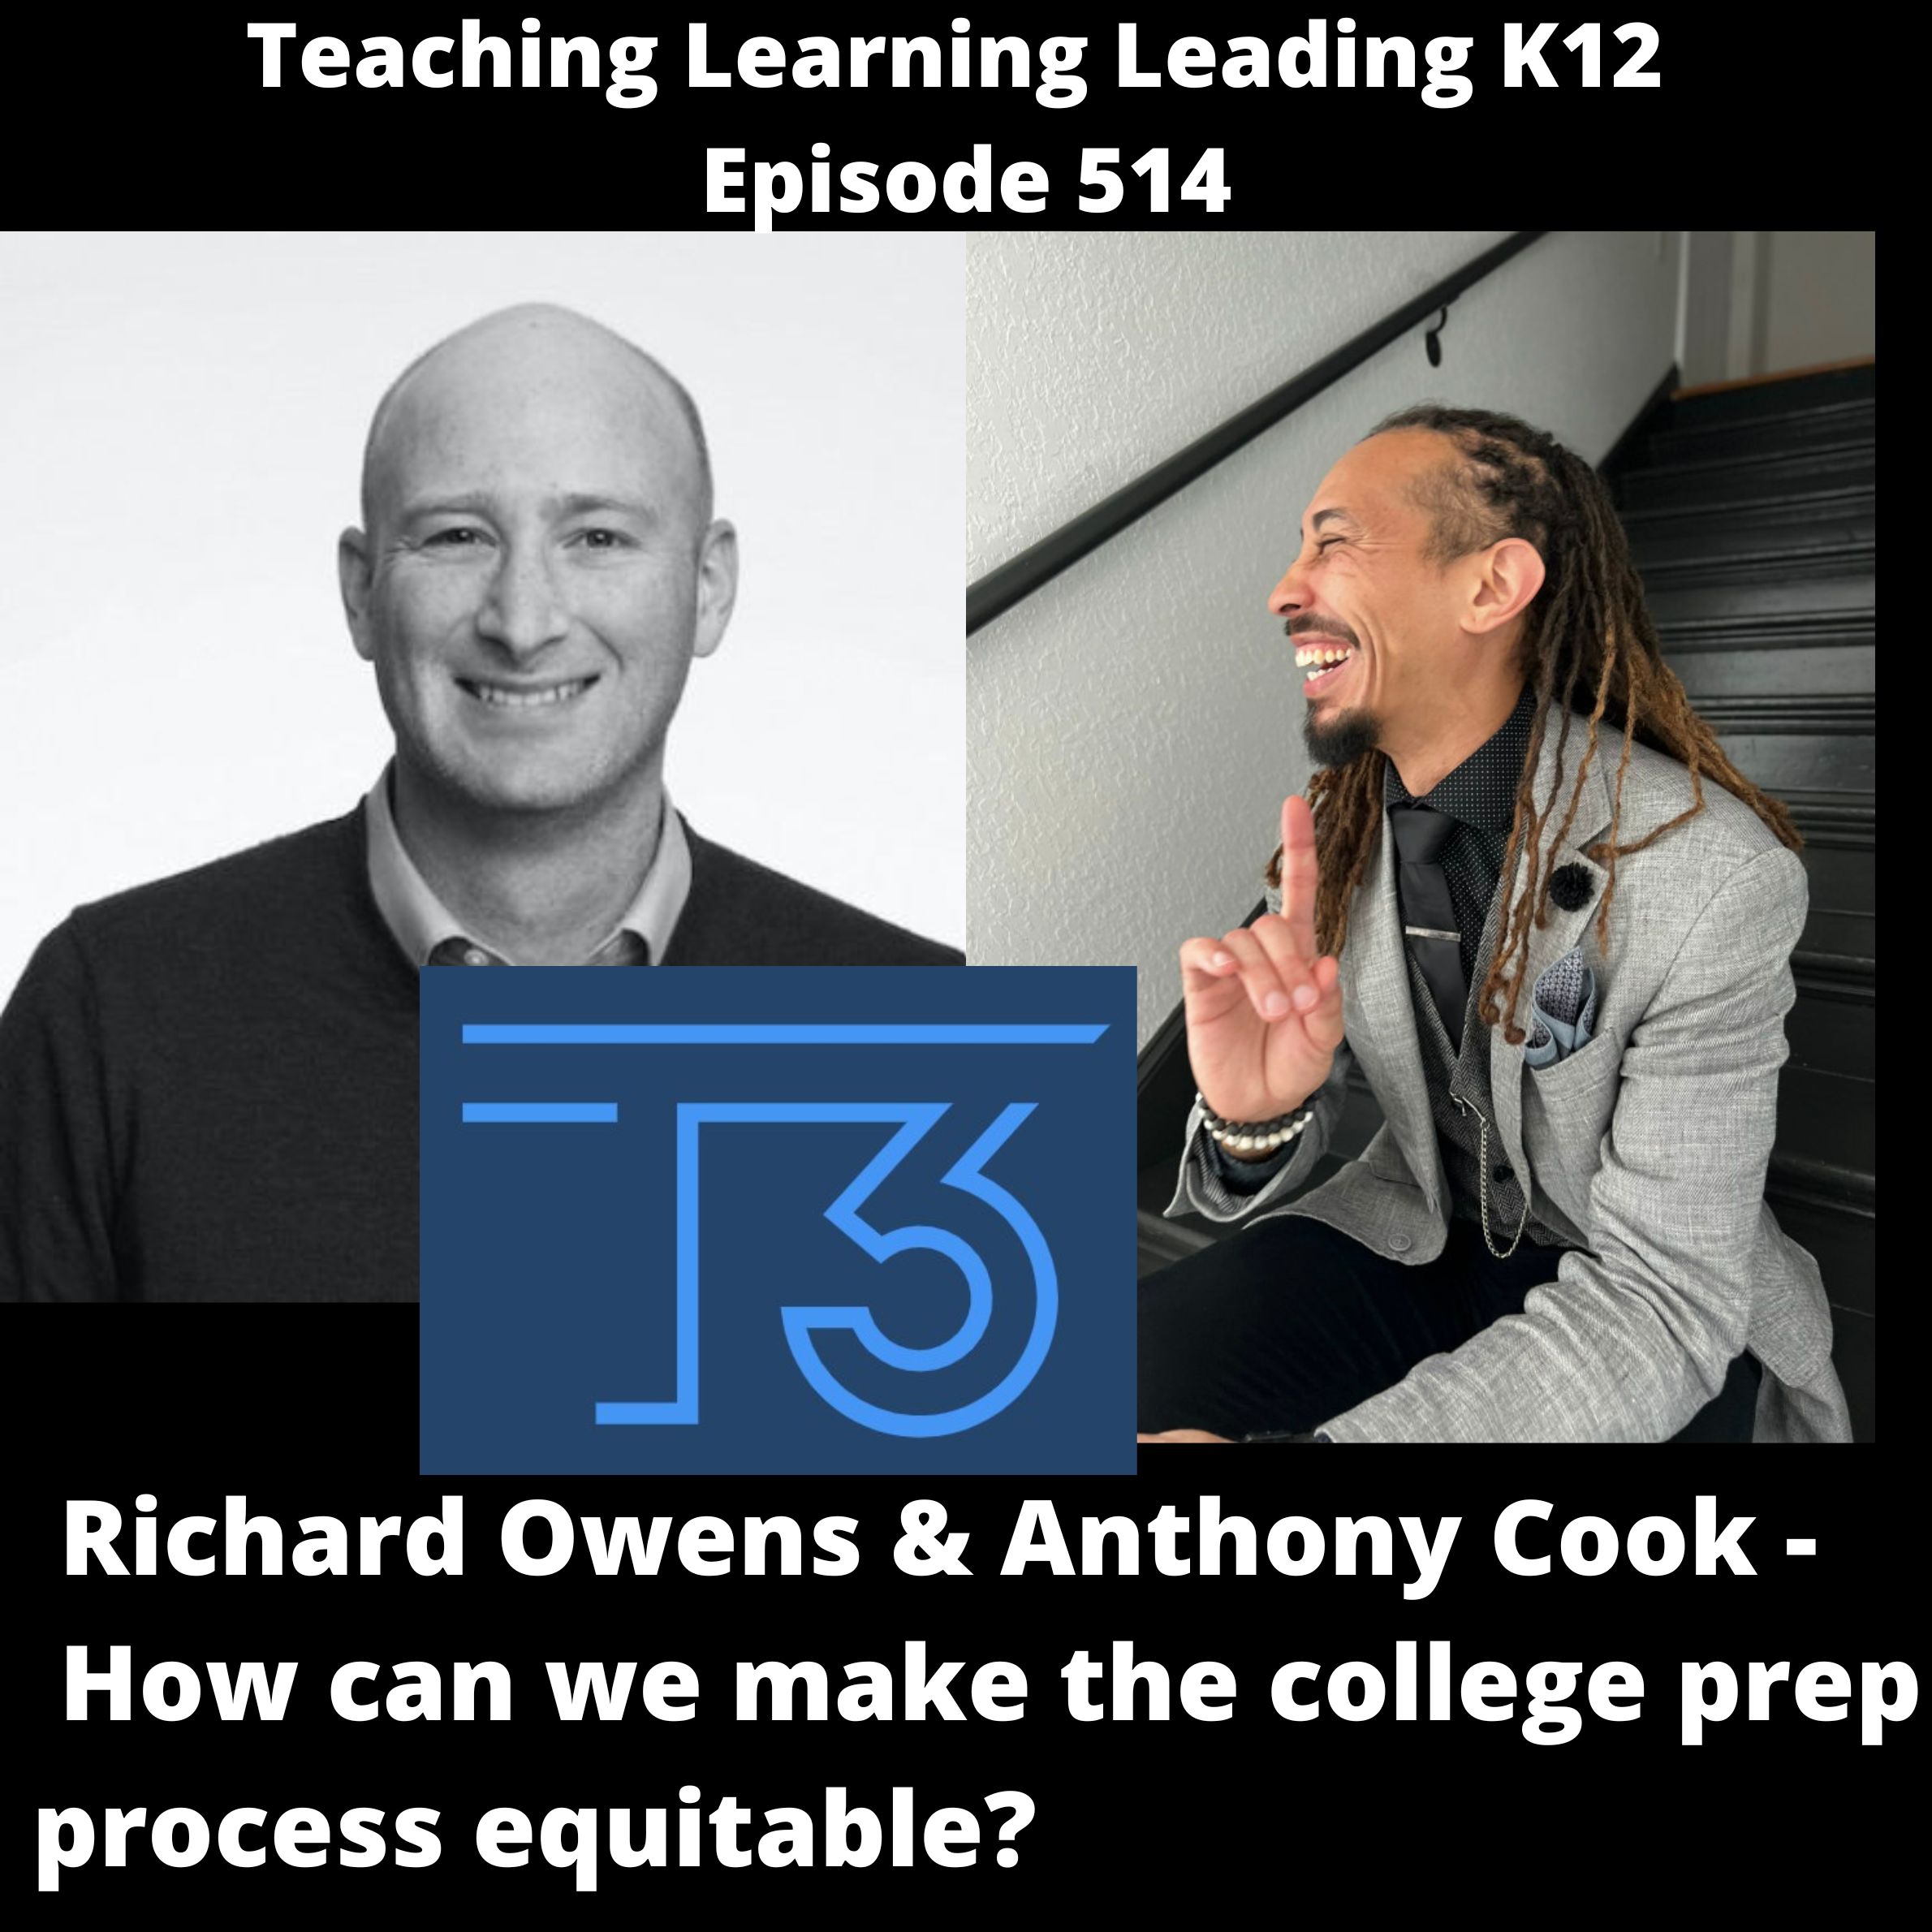 Richard Owens & Anthony Cook: How can we make the college prep process equitable? - 514 Image